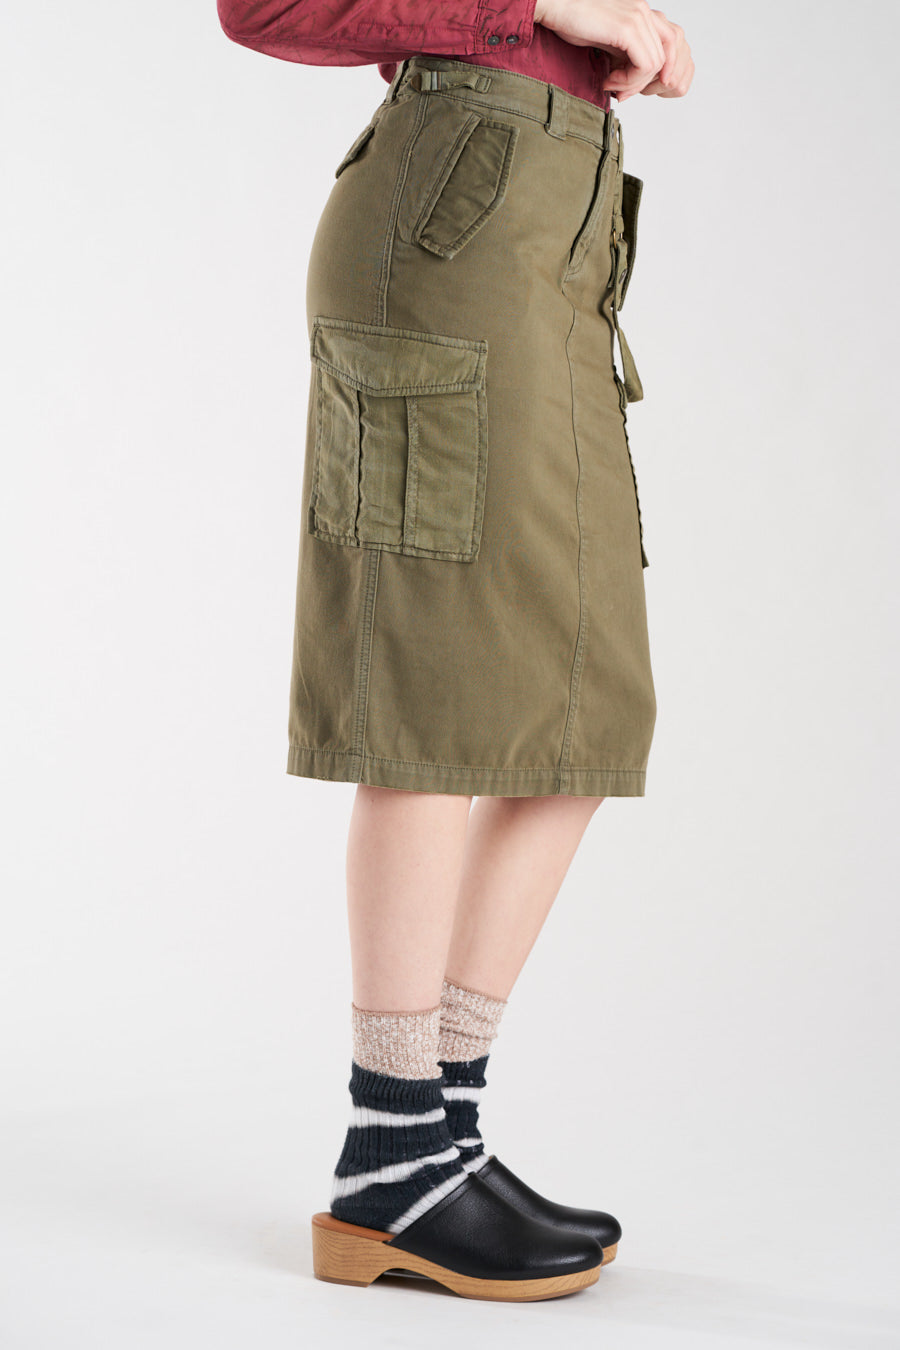 Pencil cargo skirt in New Olive